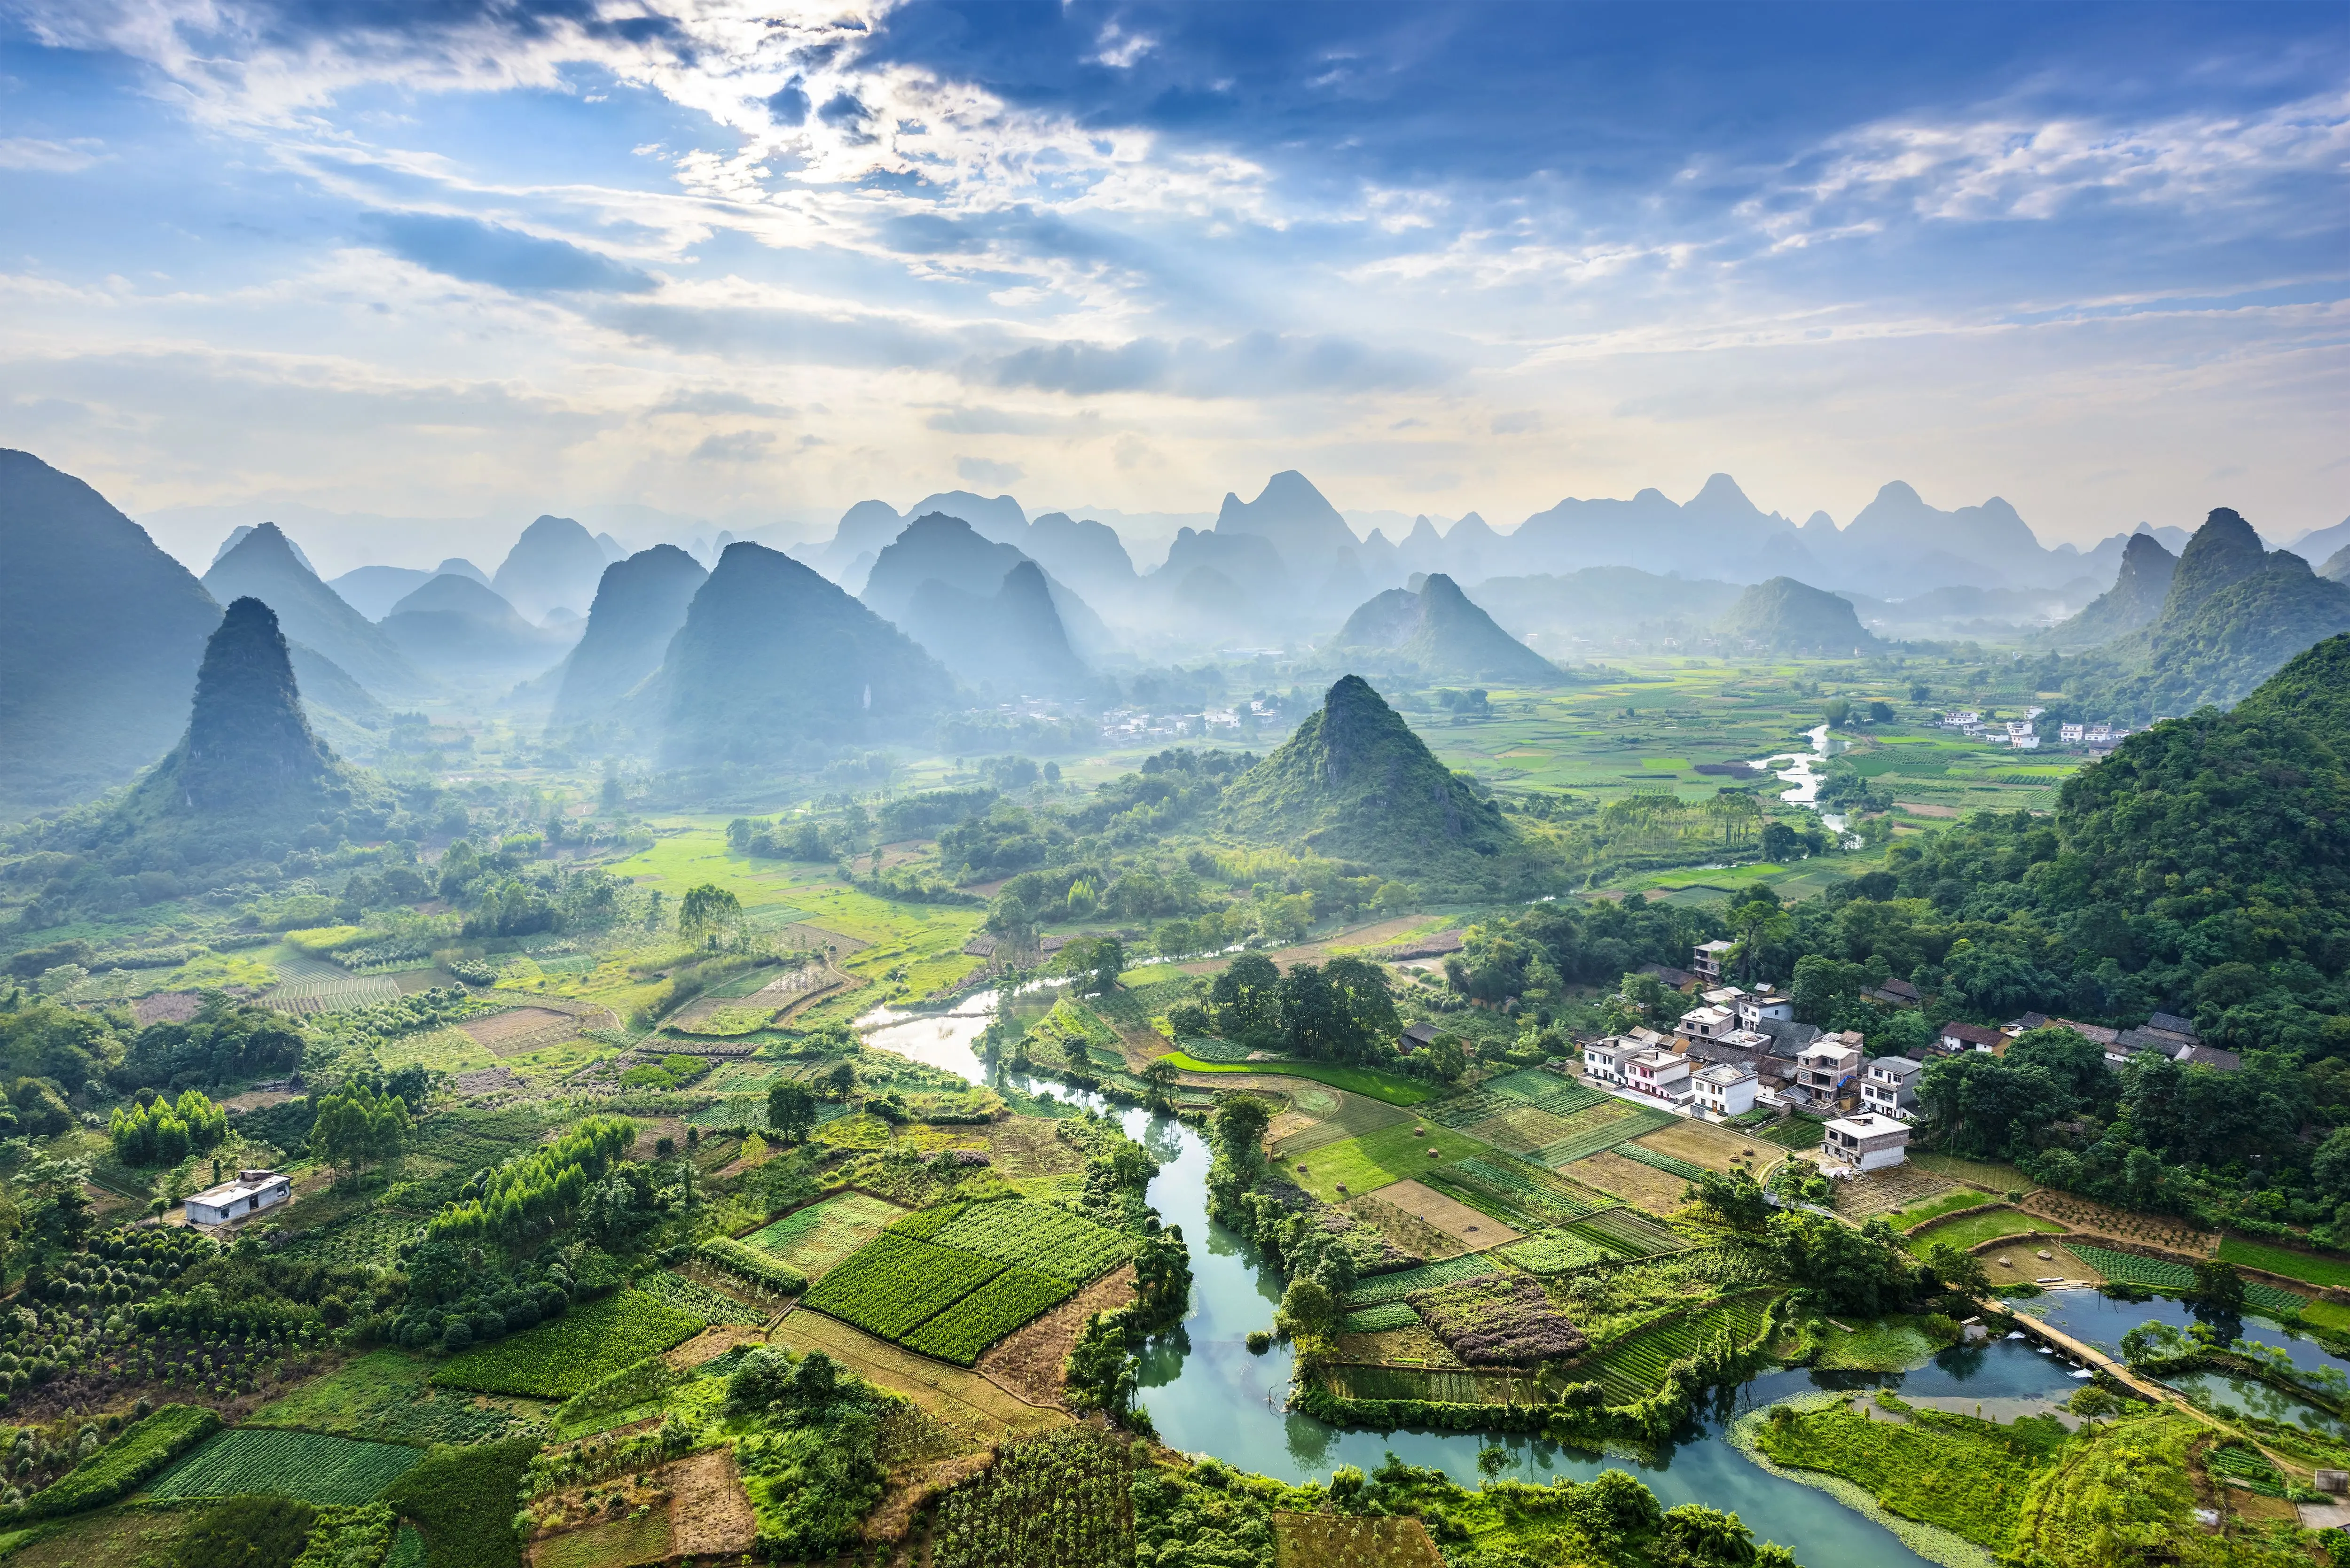 Landscape of Guilin, China